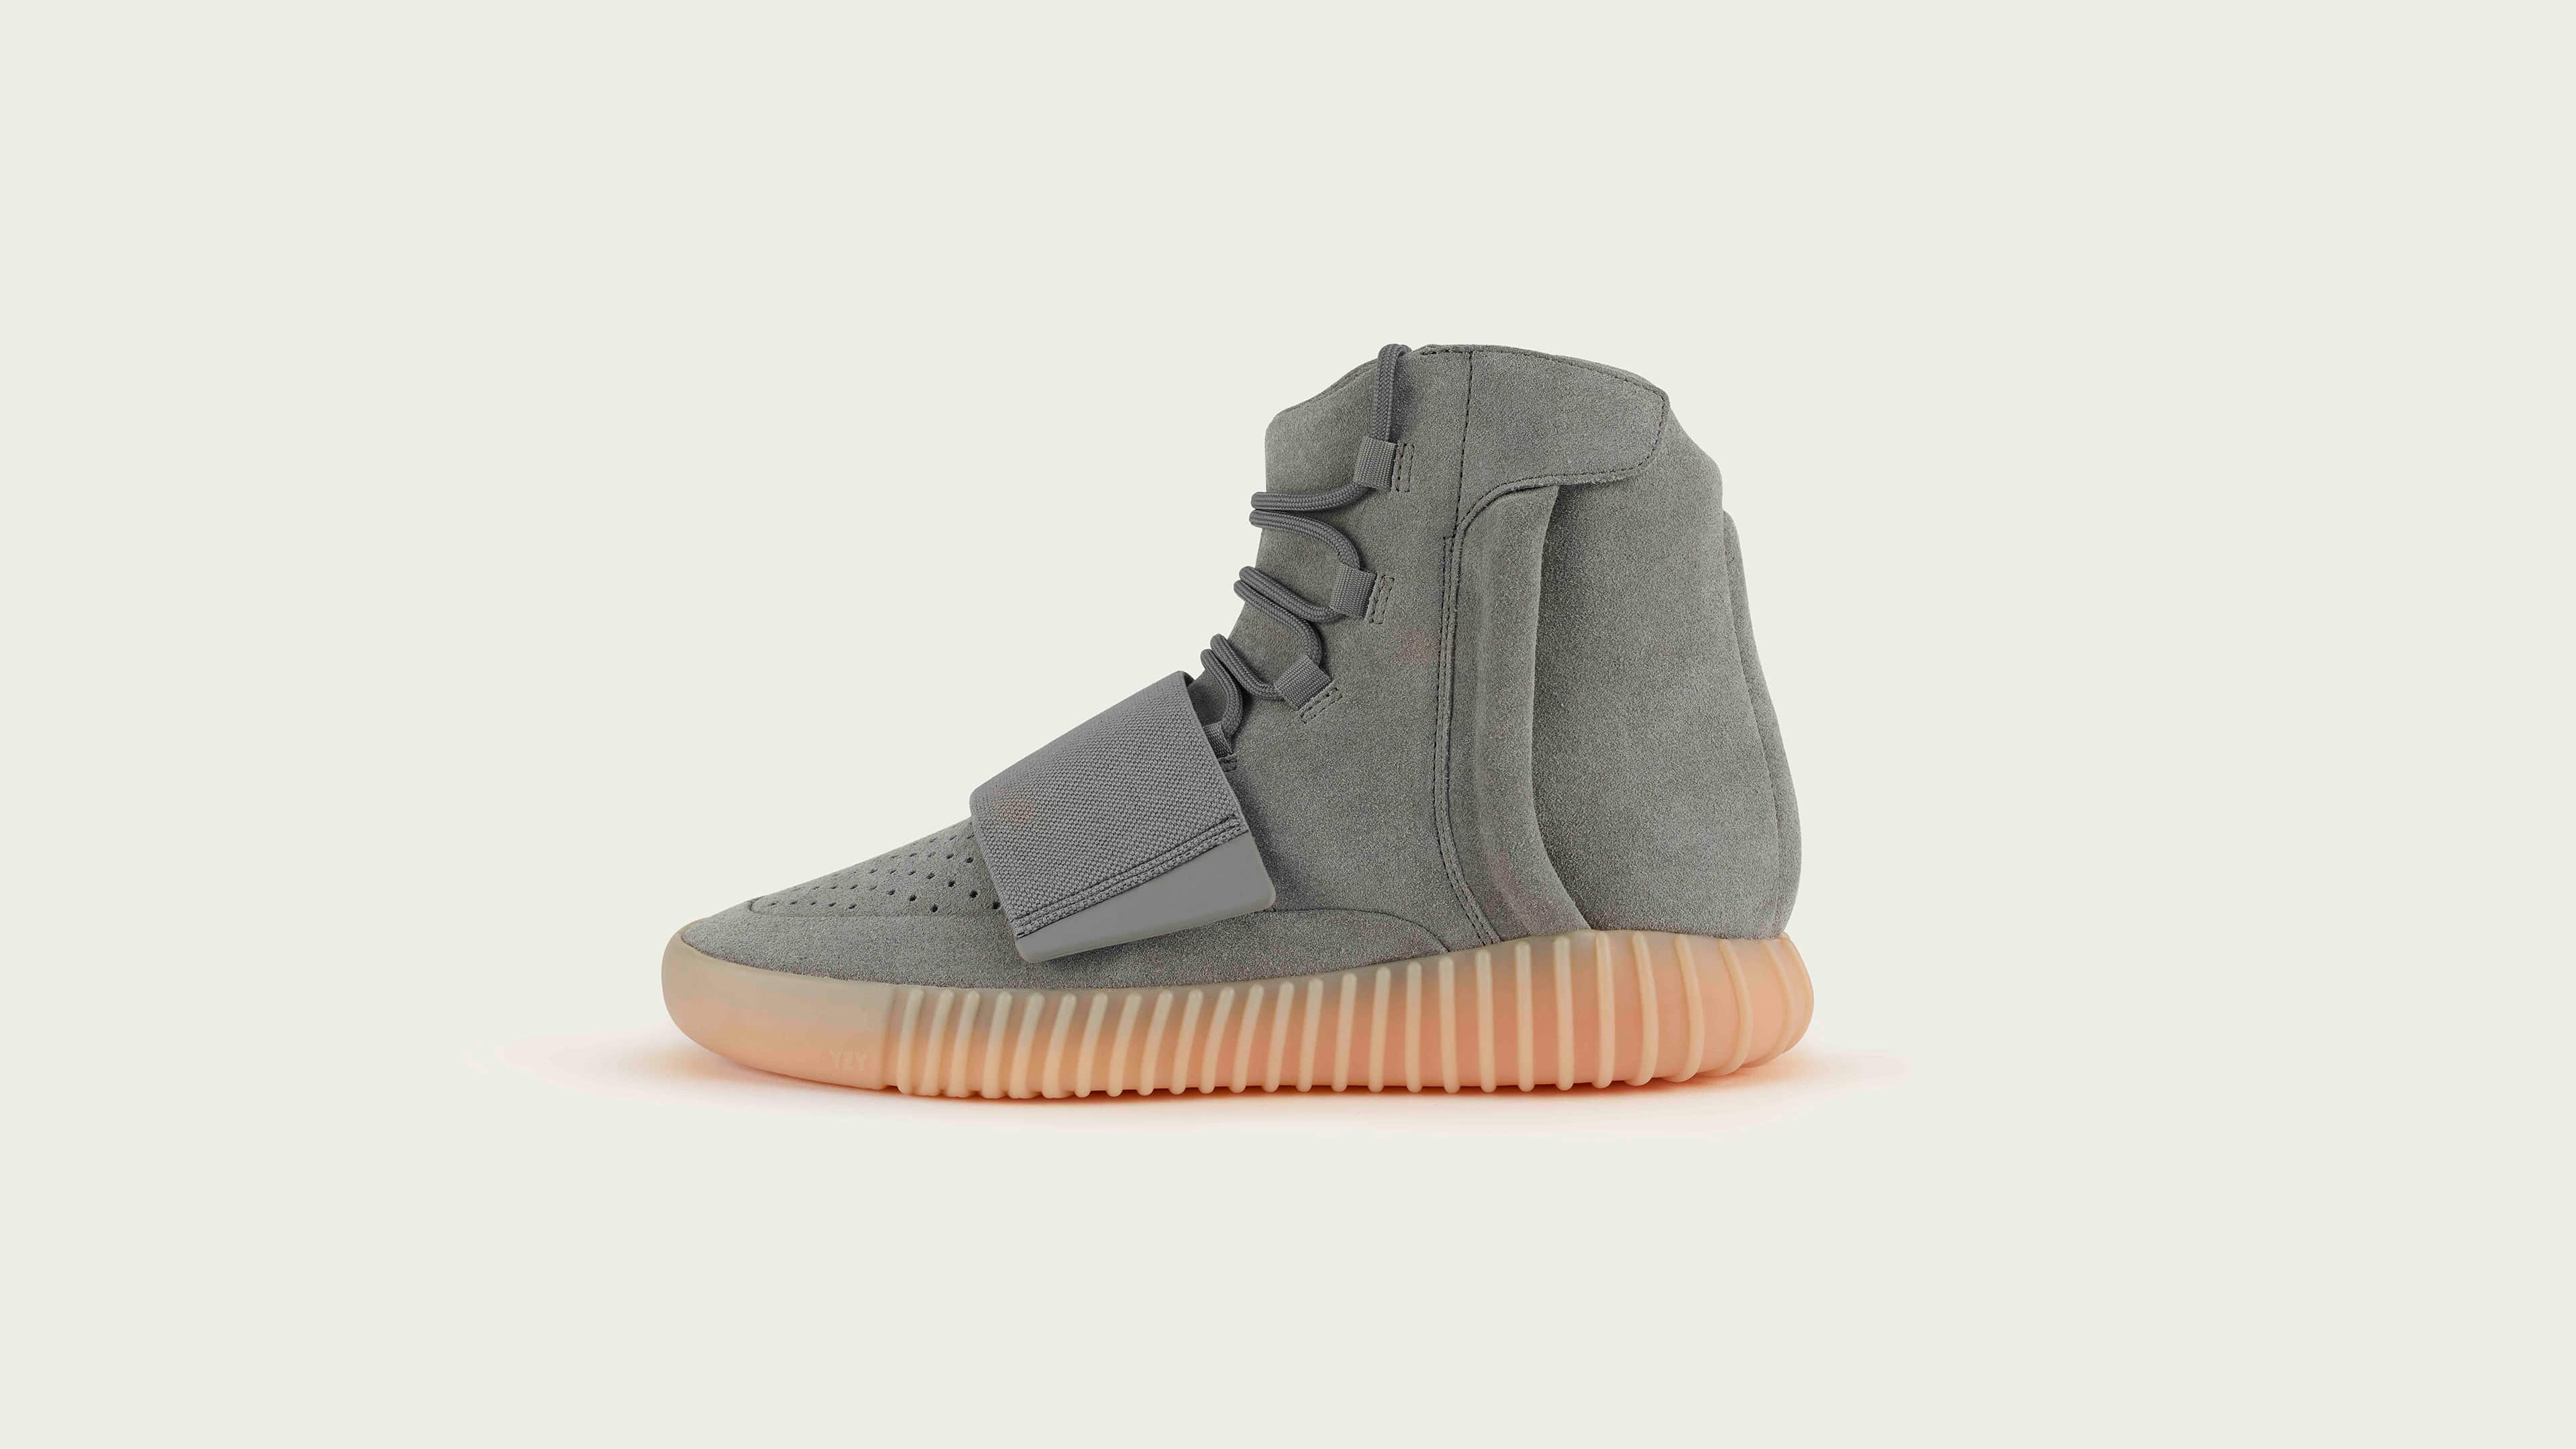 Adidas Yeezy Wallpapers 65 pictures